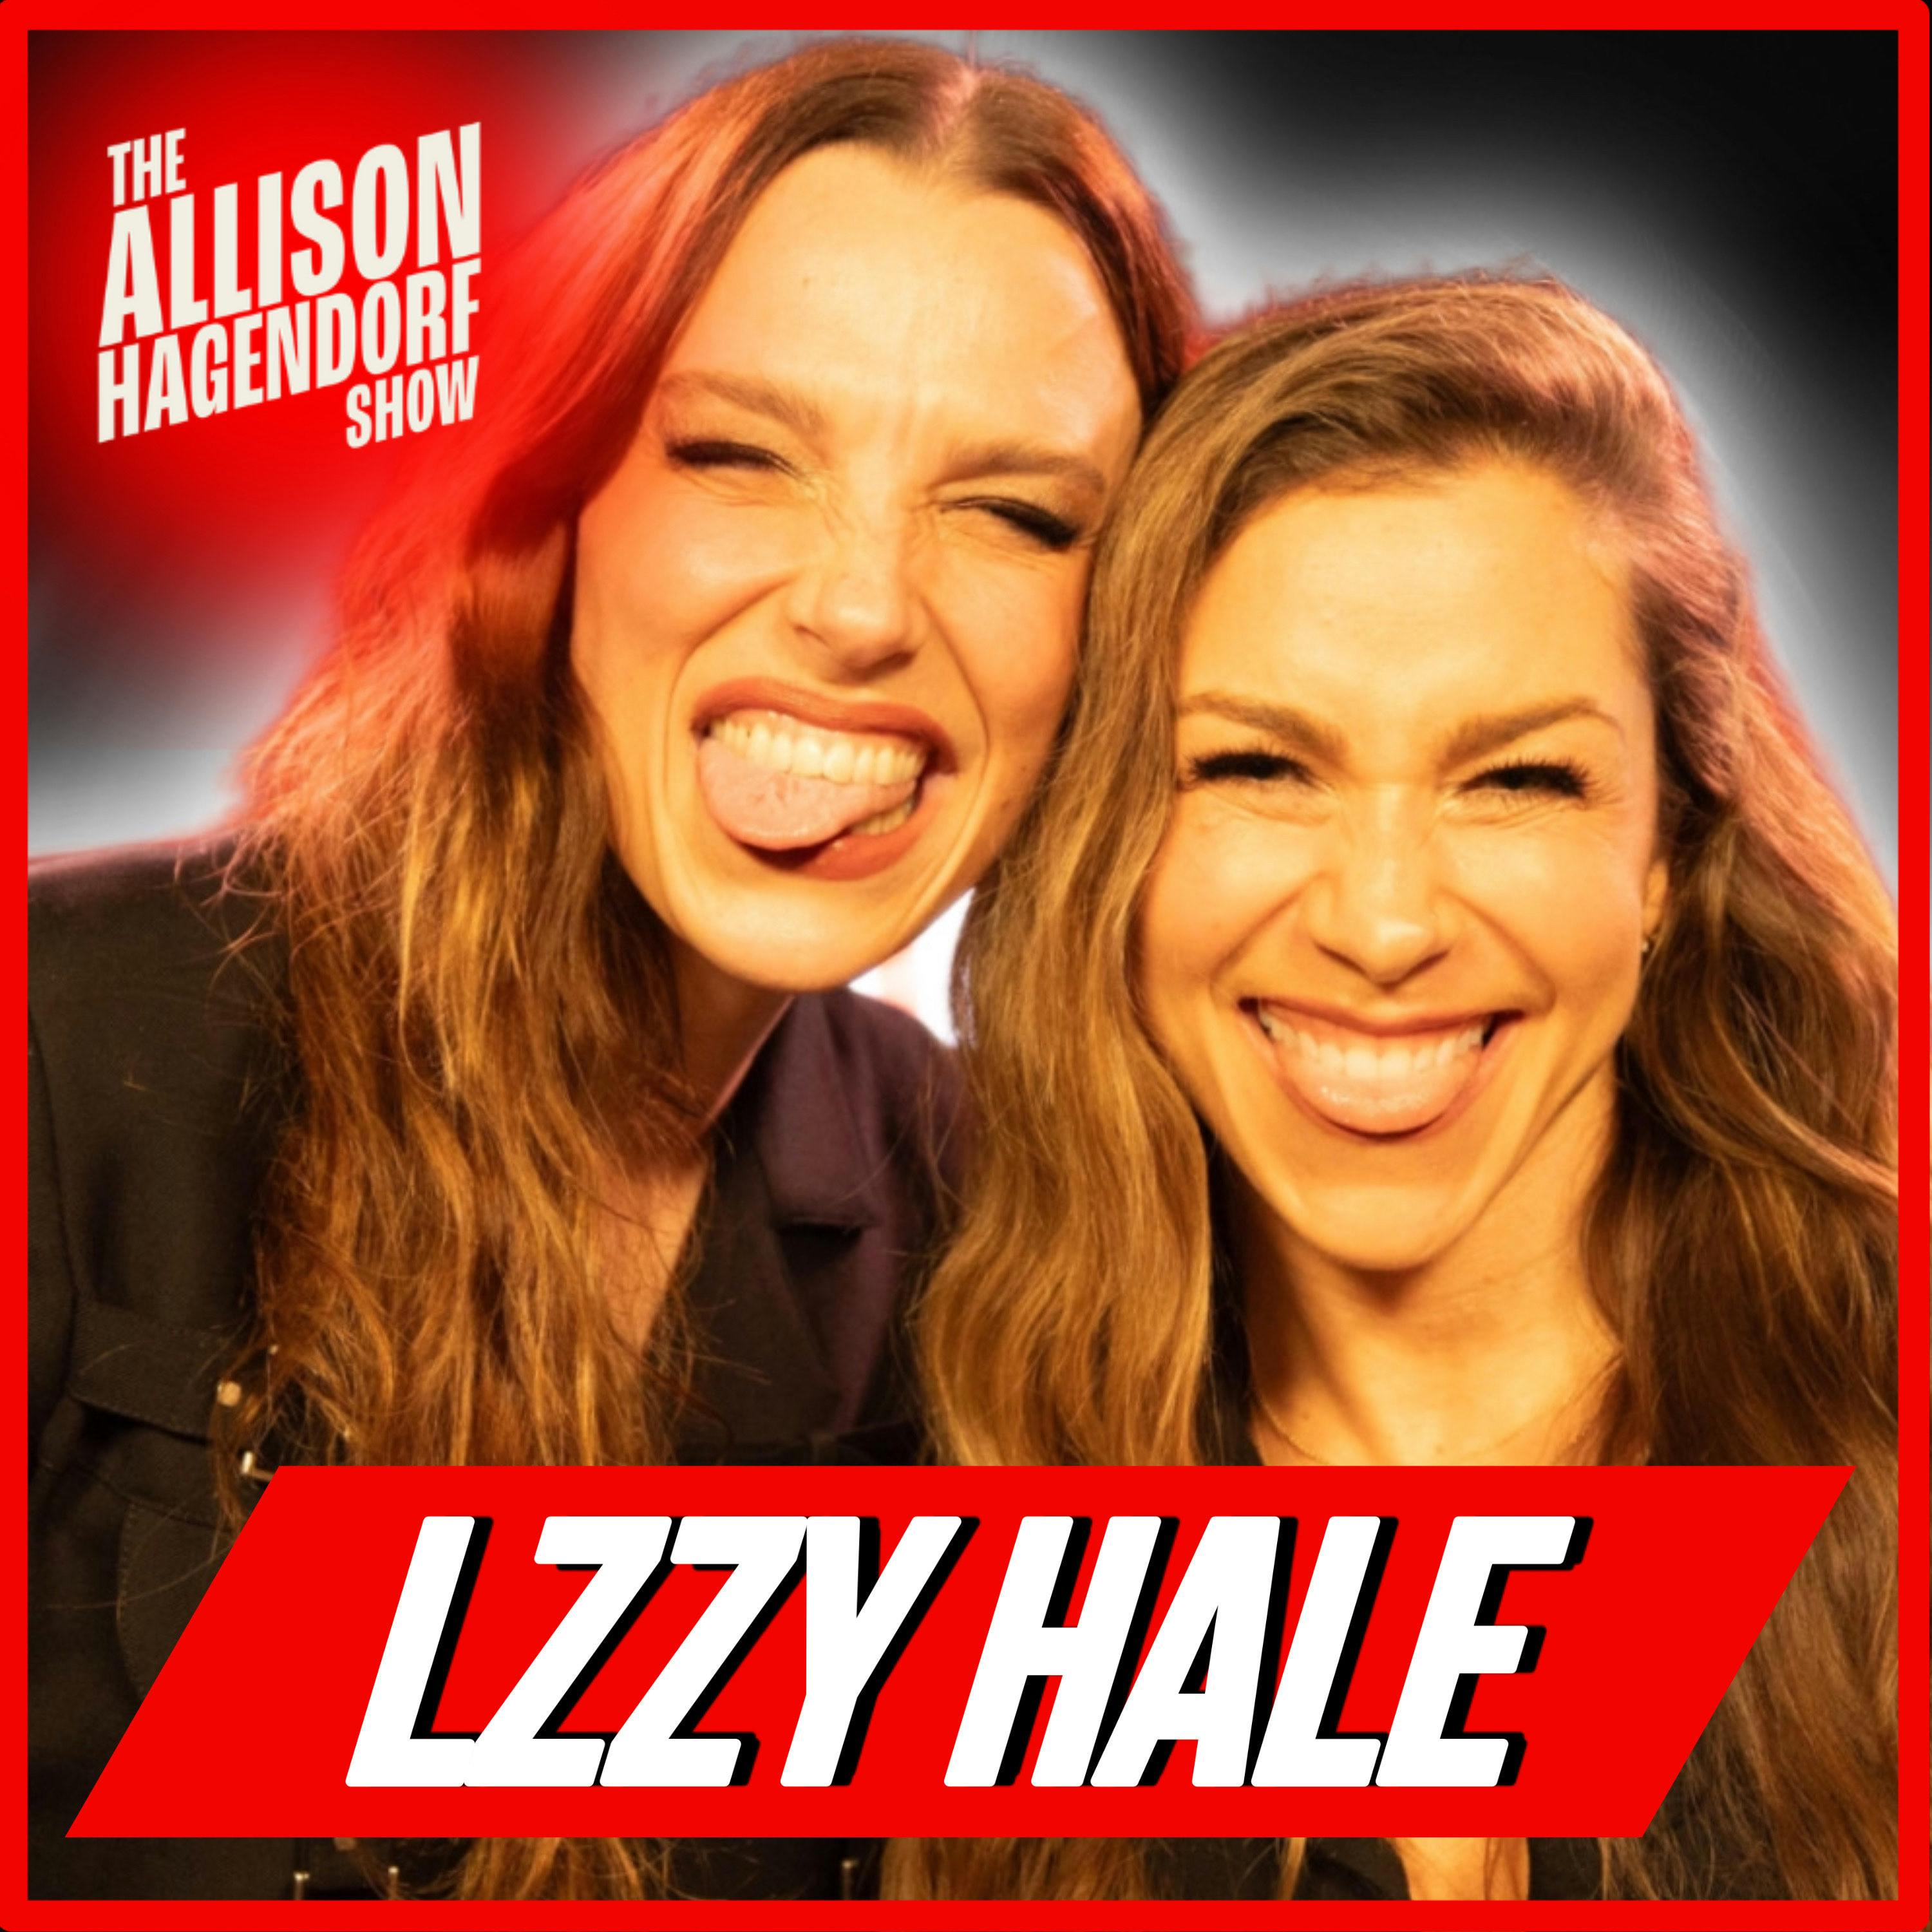 Halestorm's Lzzy Hale shares her secret to being manically happy